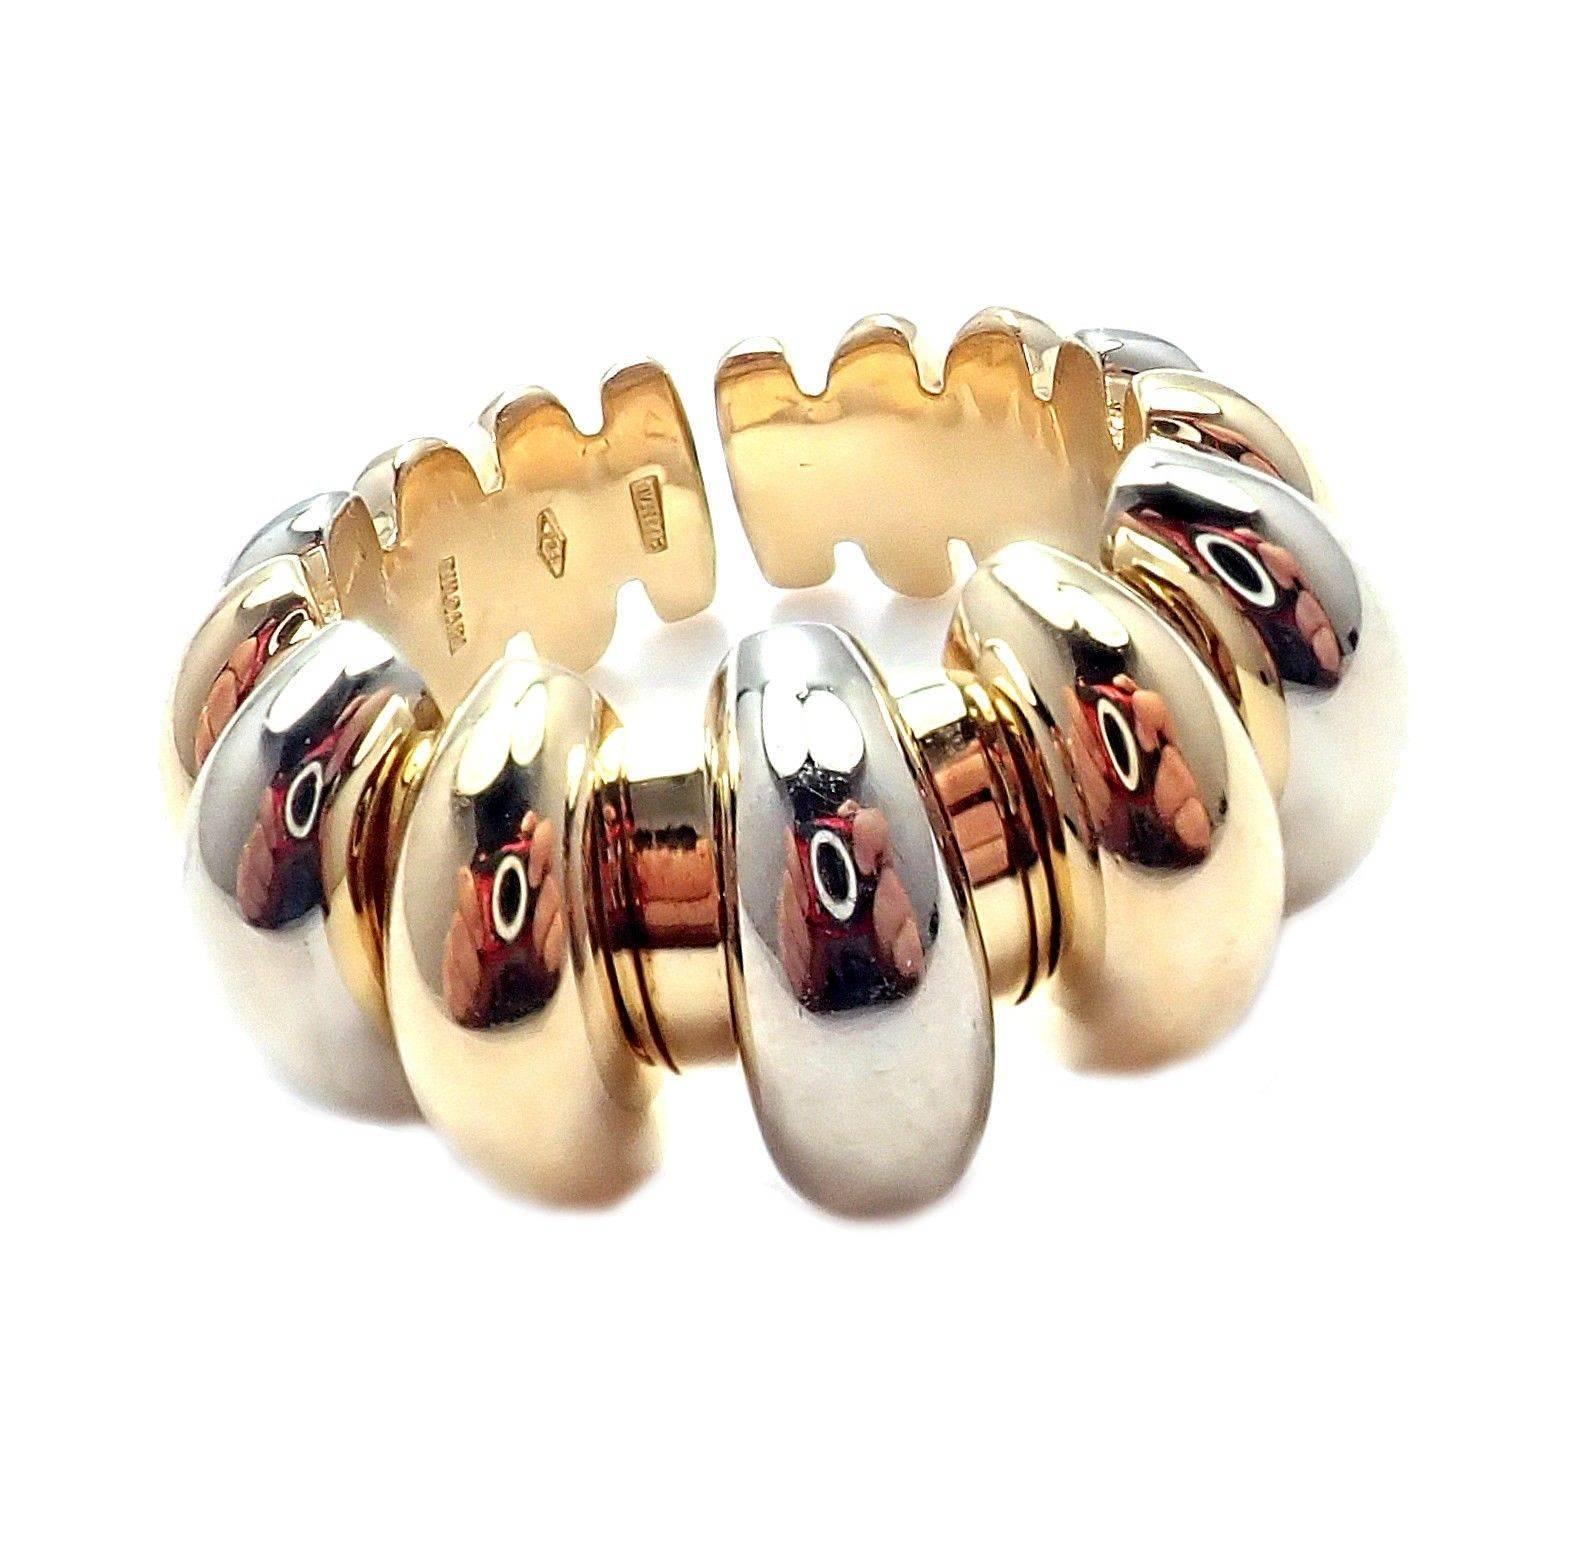 18k White And Yellow Gold Celtaura Band Ring by Bulgari.
Details:
Size: 6.5 to 7 (Flexible Bottom)
Width at top: 12mm
Weight: 18.1 grams
Stamped Hallmarks: Bvlgari, 750, 2337AL, Made in Italy
*Free Shipping within the United States*
YOUR PRICE: